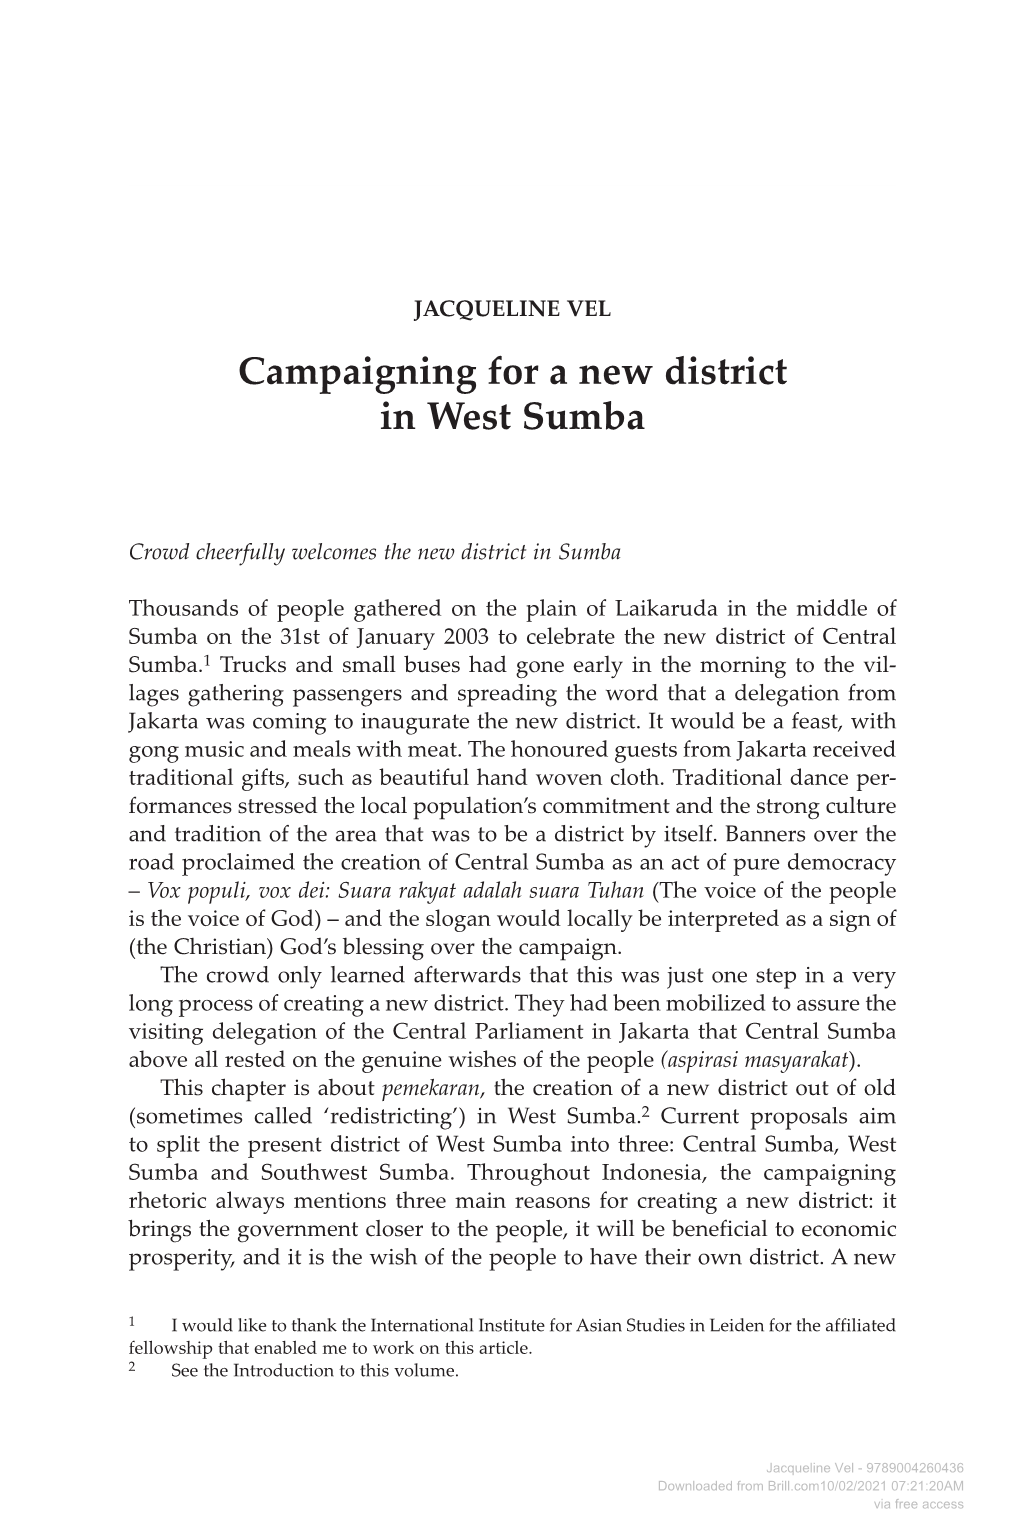 Campaigning for a New District in West Sumba